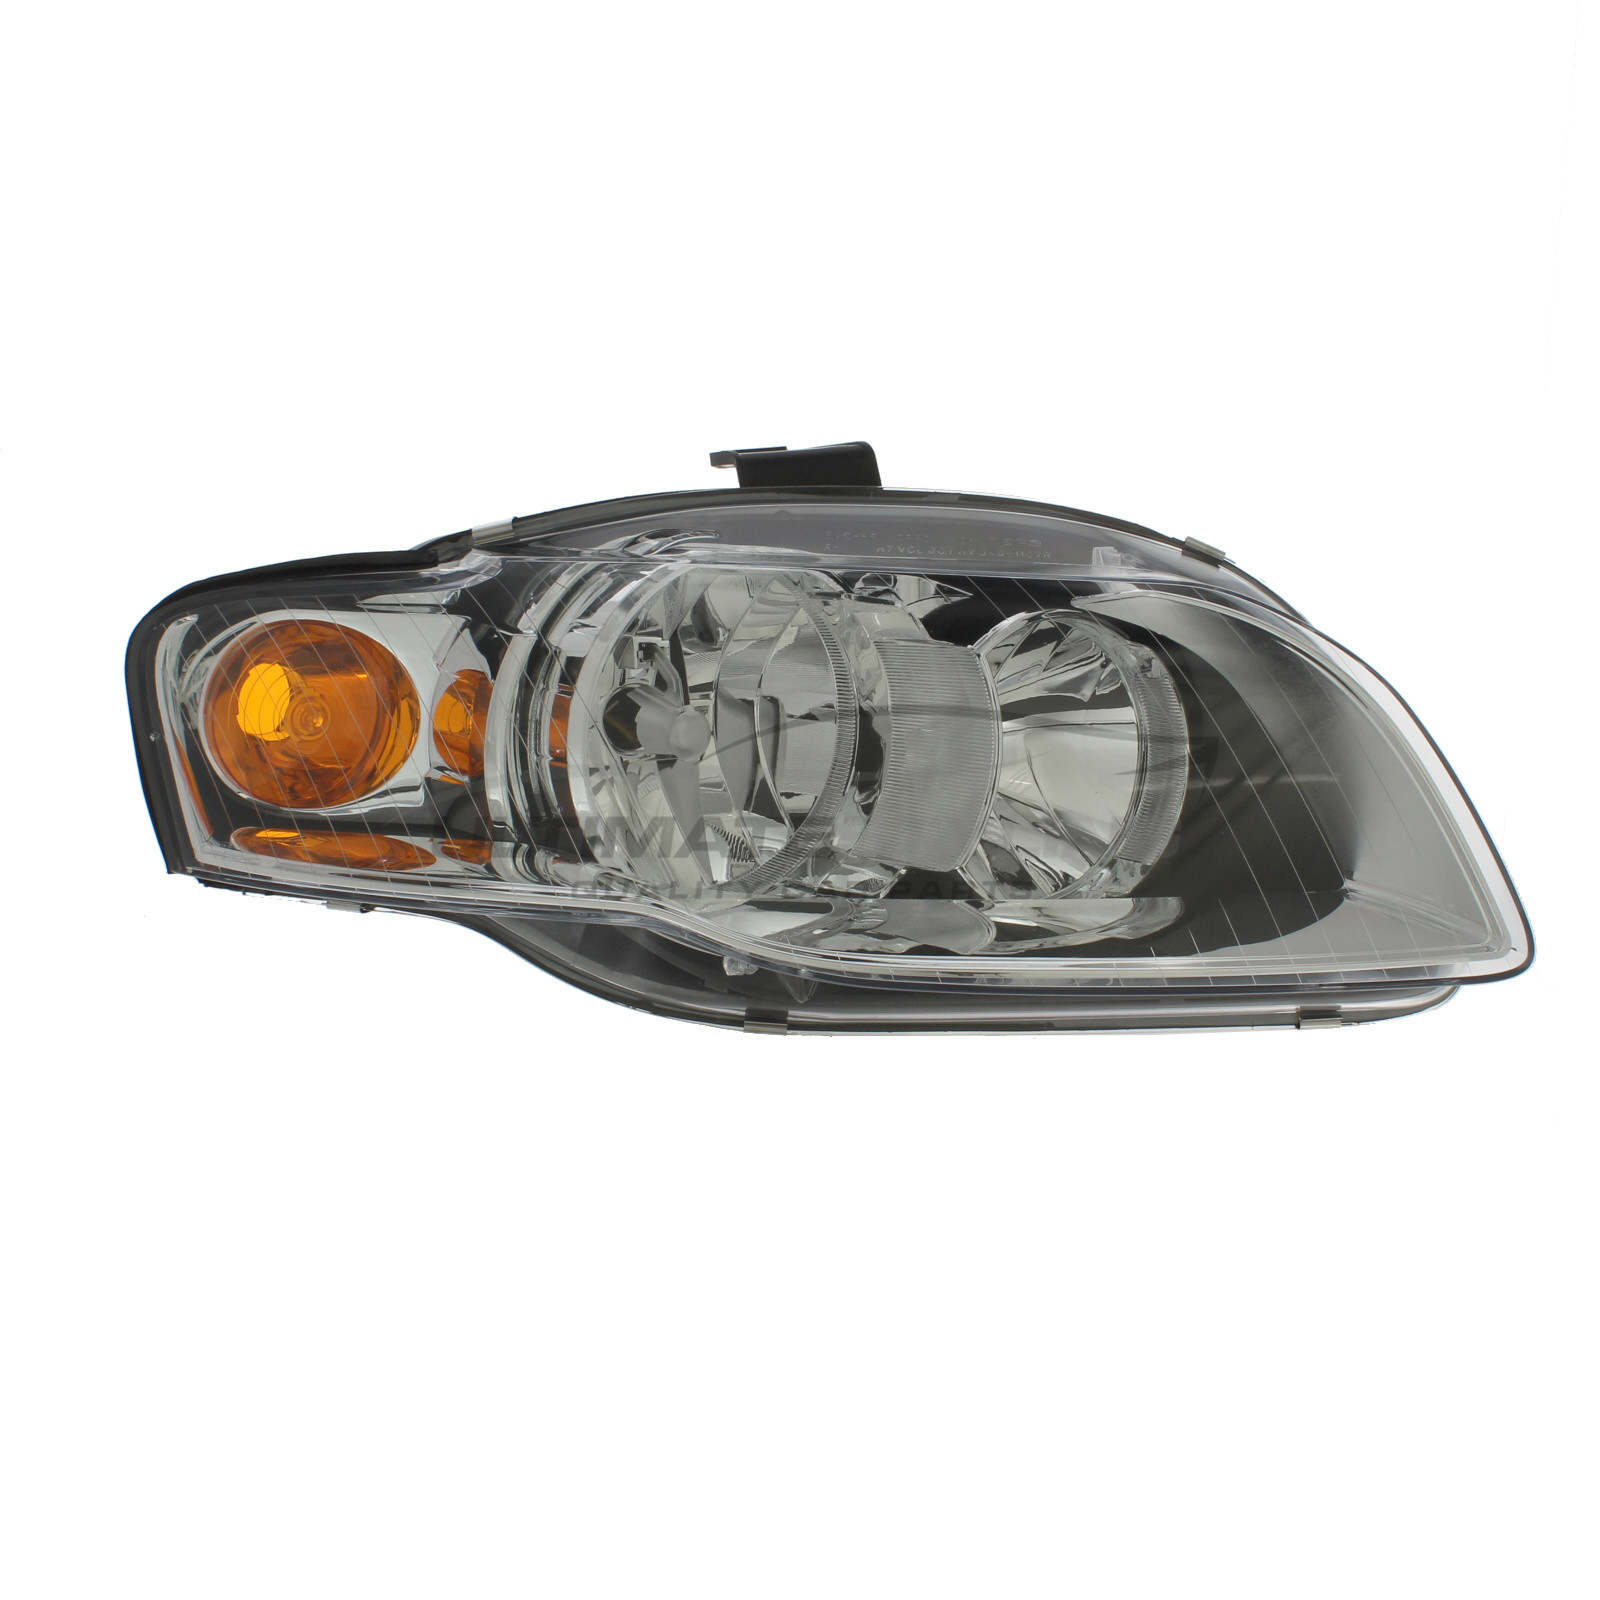 Audi A4 (Saloon & Estate) 2004-2008, A4 (Cabriolet) 2006-2010 Halogen, Electric With Motor, Chrome Headlight / Headlamp Including Amber Indicator Drivers Side (RH)